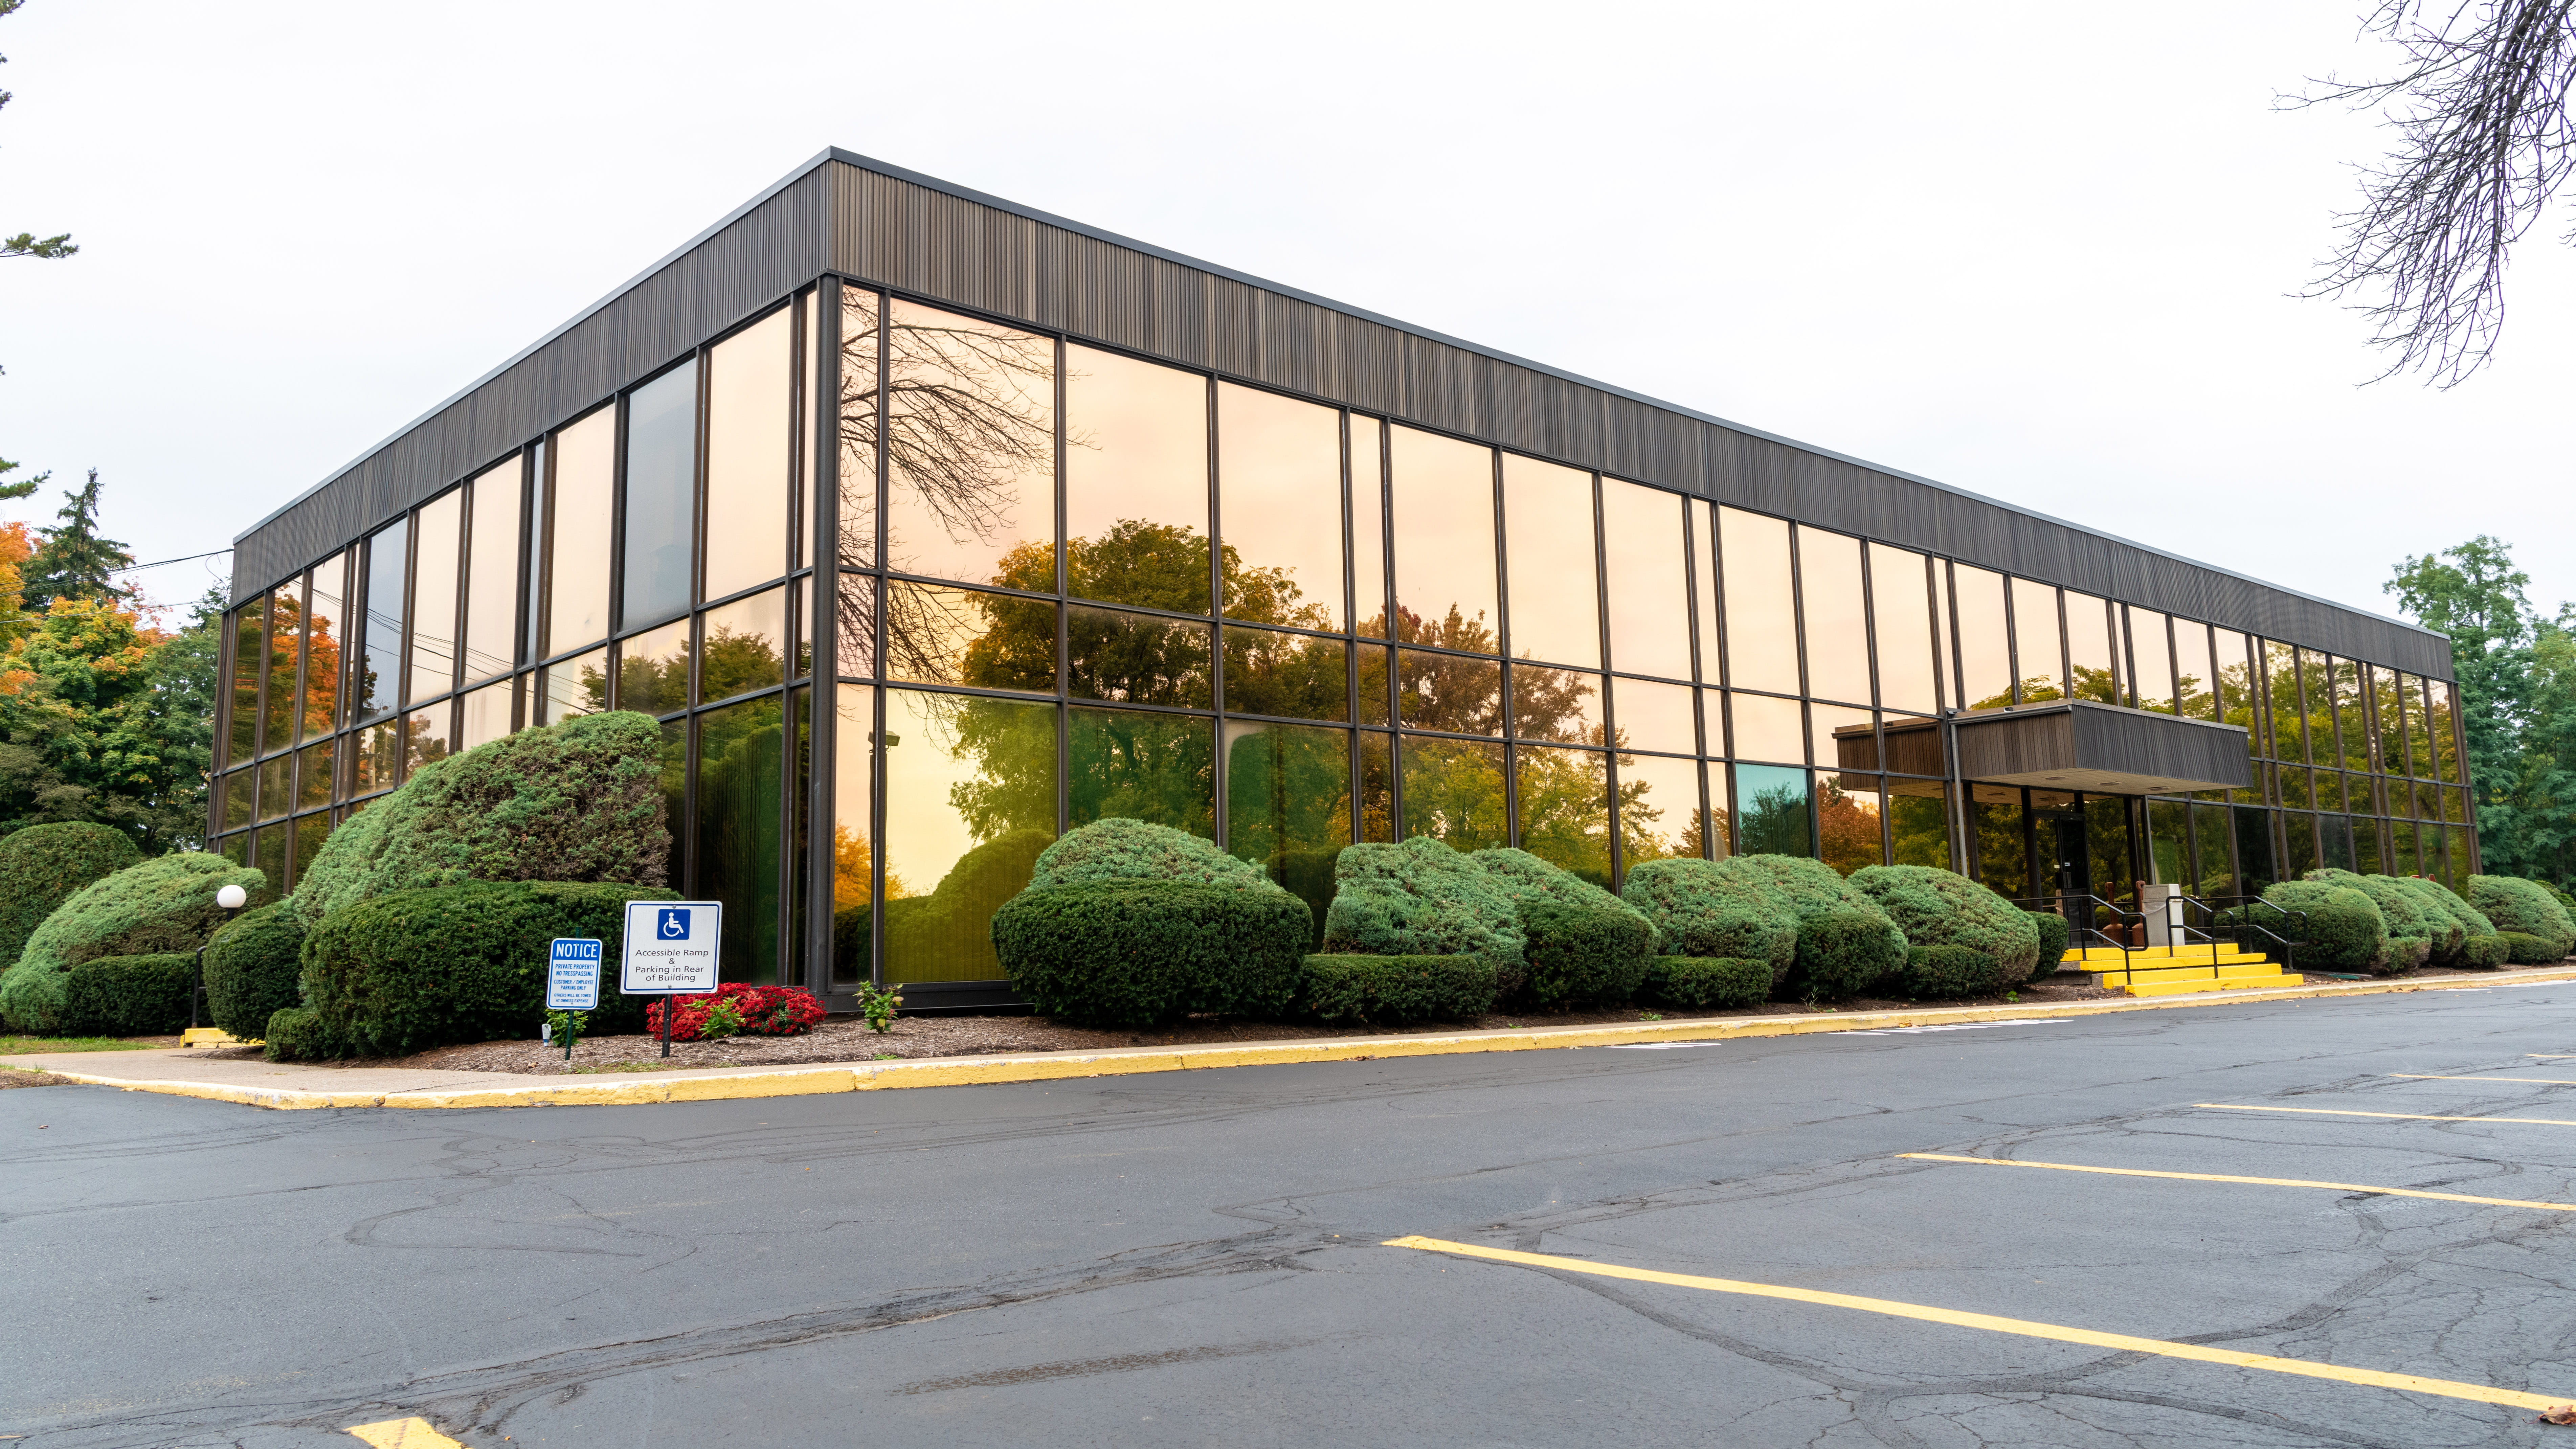 Exterior view of 80 West Avenue in Brockport, NY